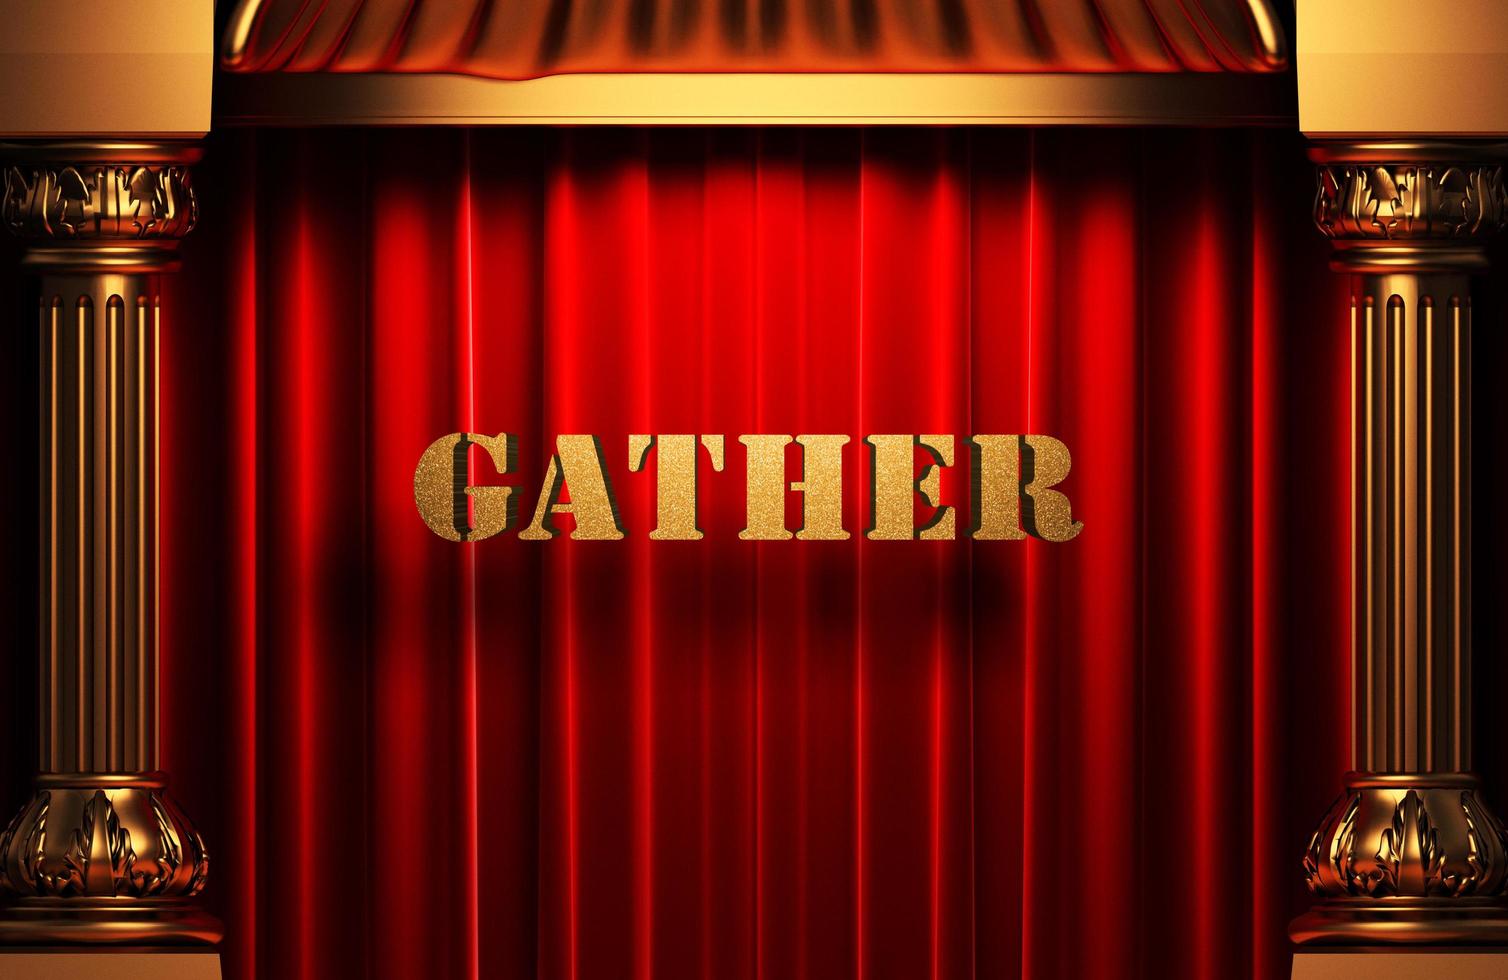 gather golden word on red curtain photo